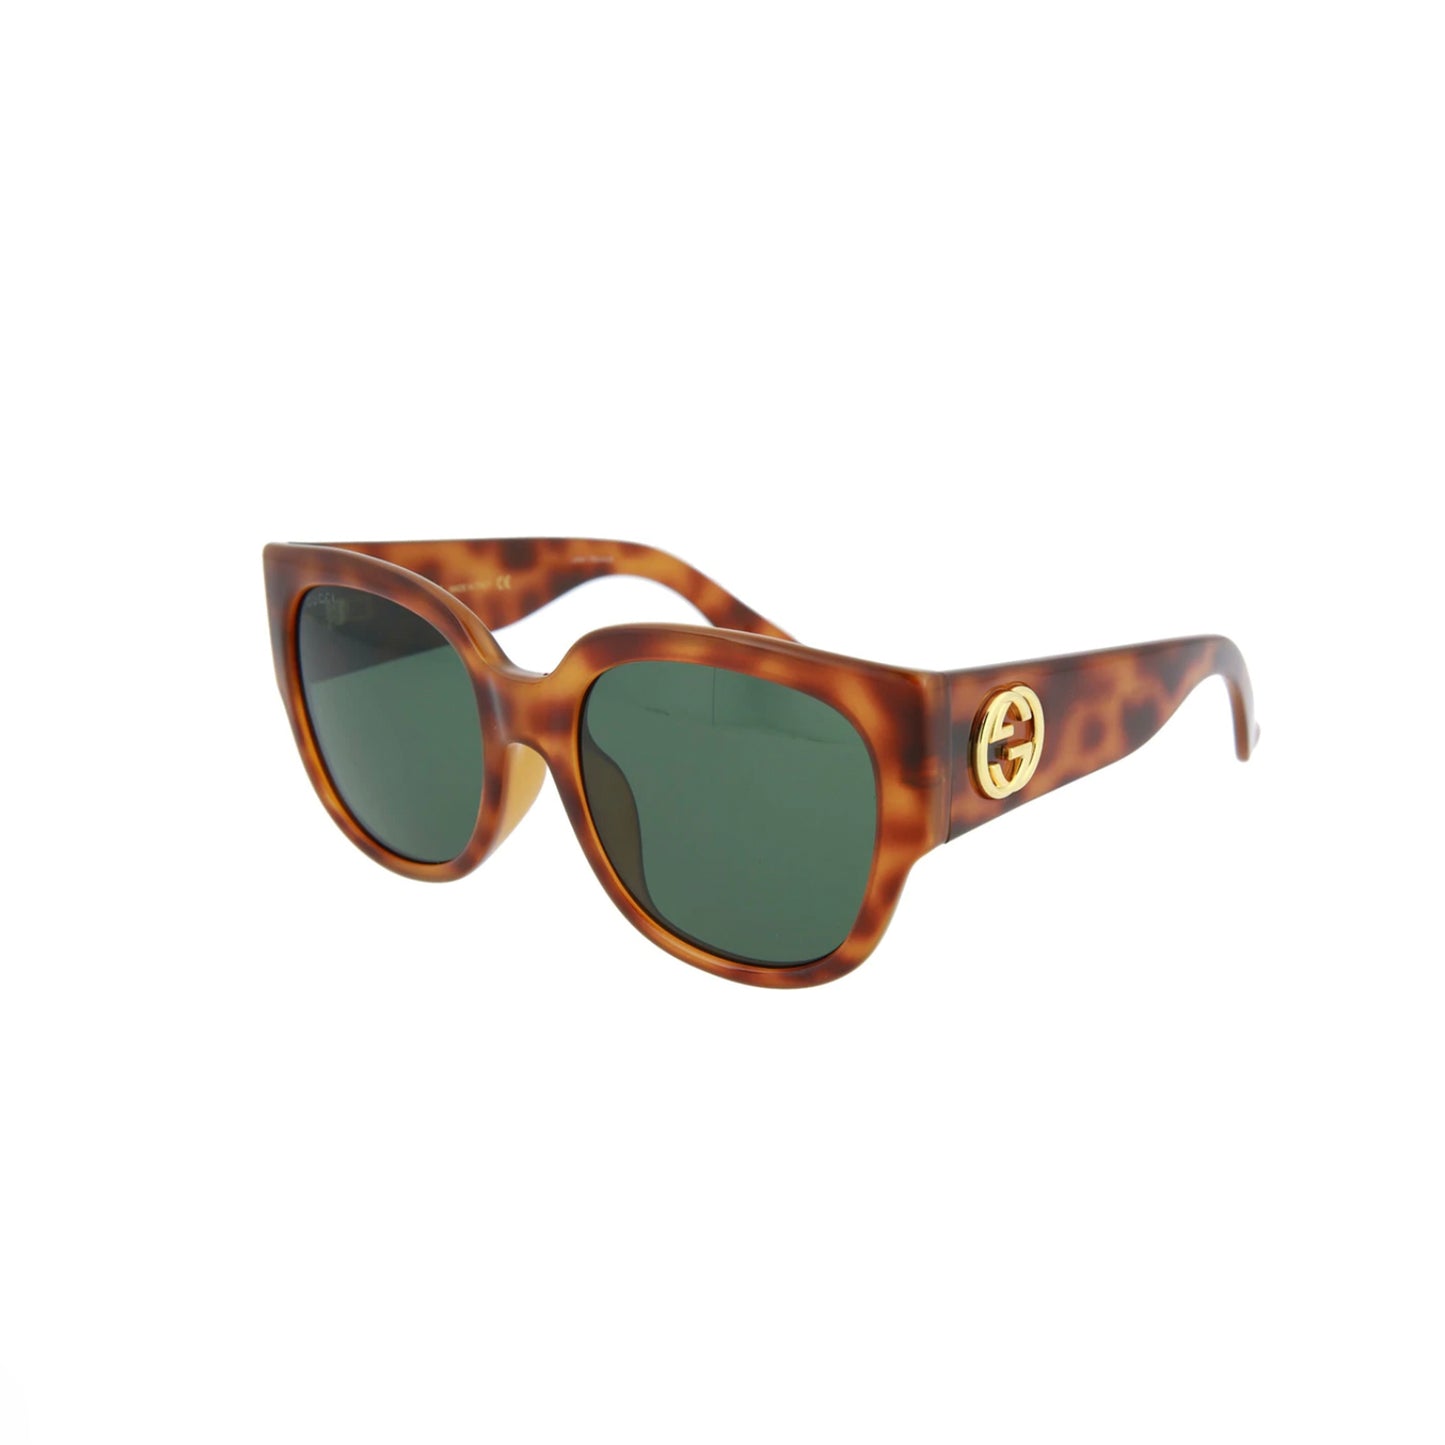 Gucci Best Sunglasses MSRP $375. These Gucci sunglasses are a perfect choice from the fabulous Gucci collection. These exciting Sunglasses have a compelling arrangement of fabulous features.